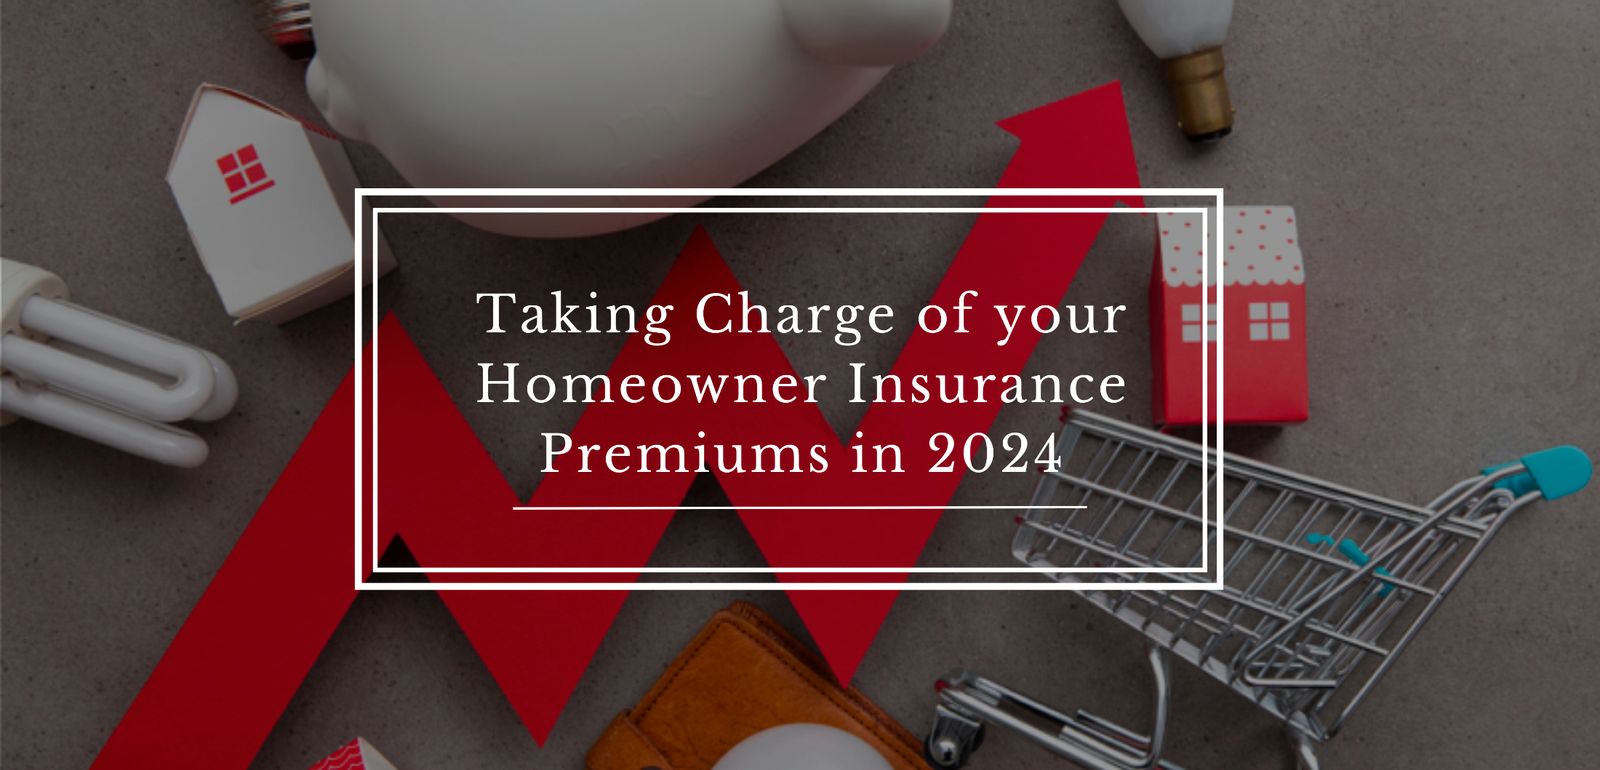 Empower Yourself: Taking Charge of your Homeowner Insurance Premiums in 2024